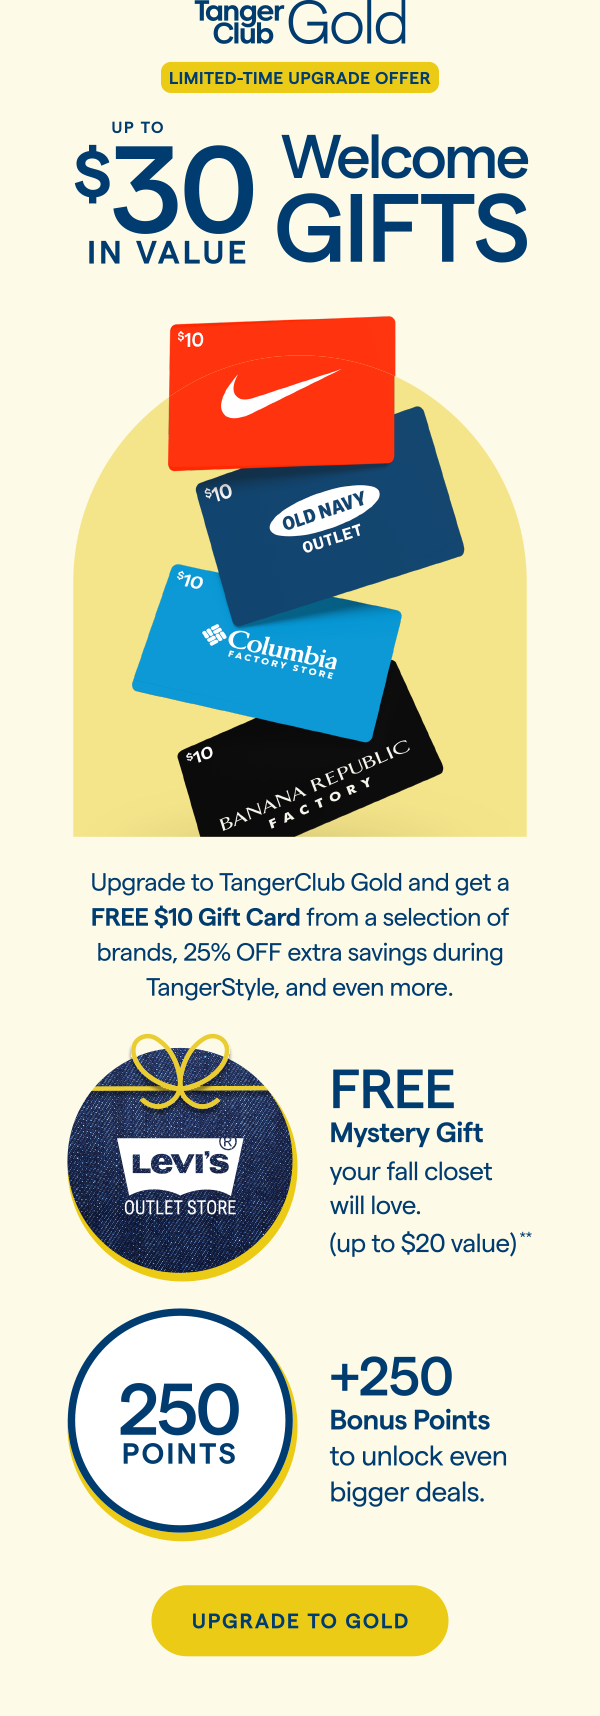 Upgrade to TangerClub Gold and get a FREE $10 Gift Card from a selection of brands, 25% OFF extra savings during TangerStyle, and even more. UPGRADE TO GOLD > 